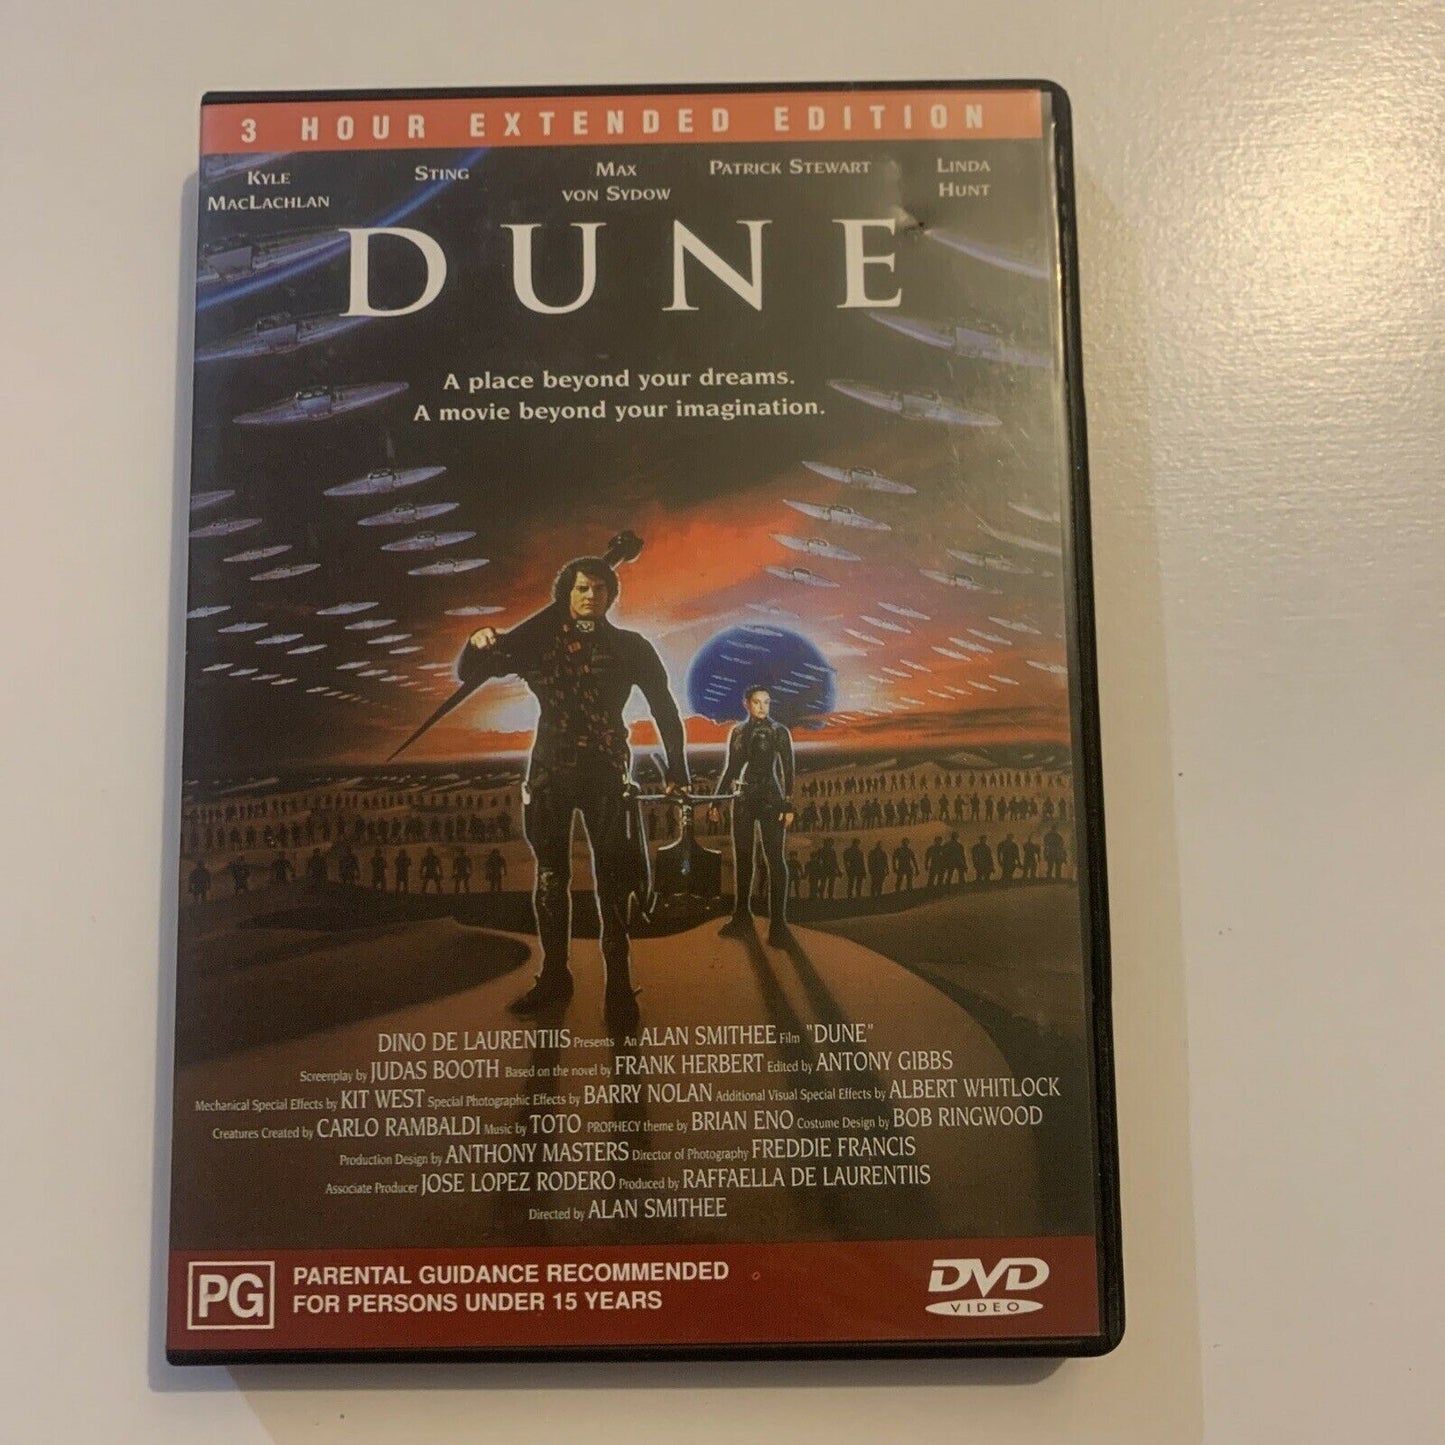 Dune - 3 Hour Extended Edition (DVD, 1984) Kyle MacLachlan, Sting